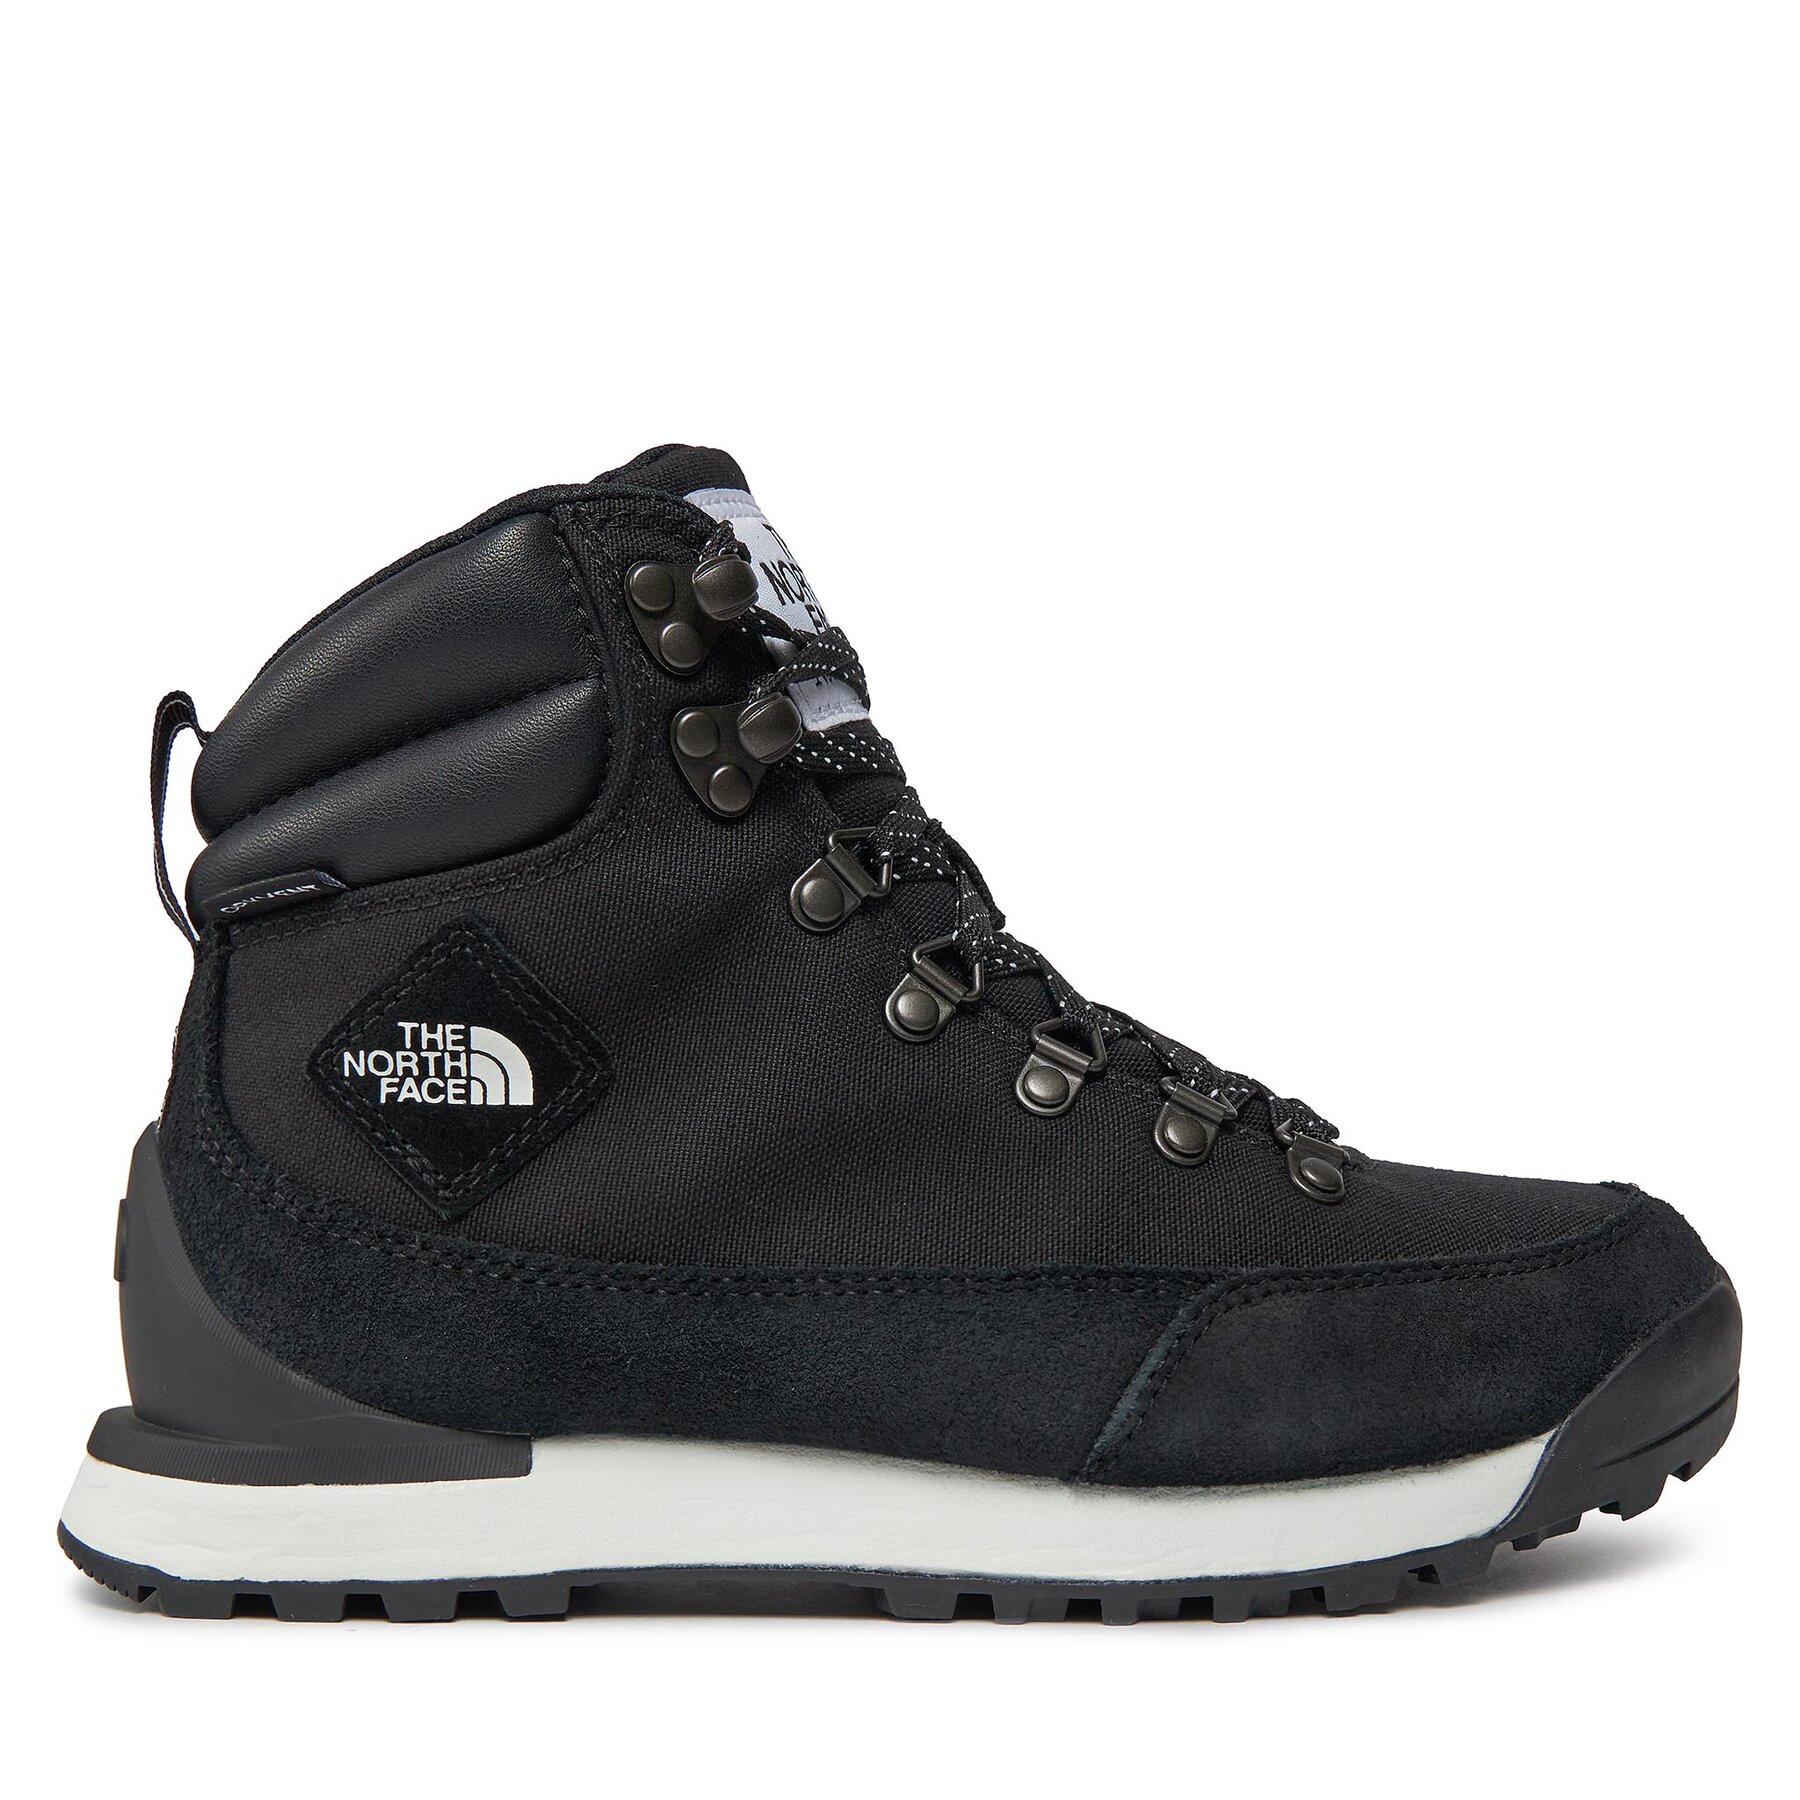 Trekkingschuhe The North Face W Back-To-Berkeley Iv Textile WpNF0A8179KY41 Tnf Black/Tnf White von The North Face